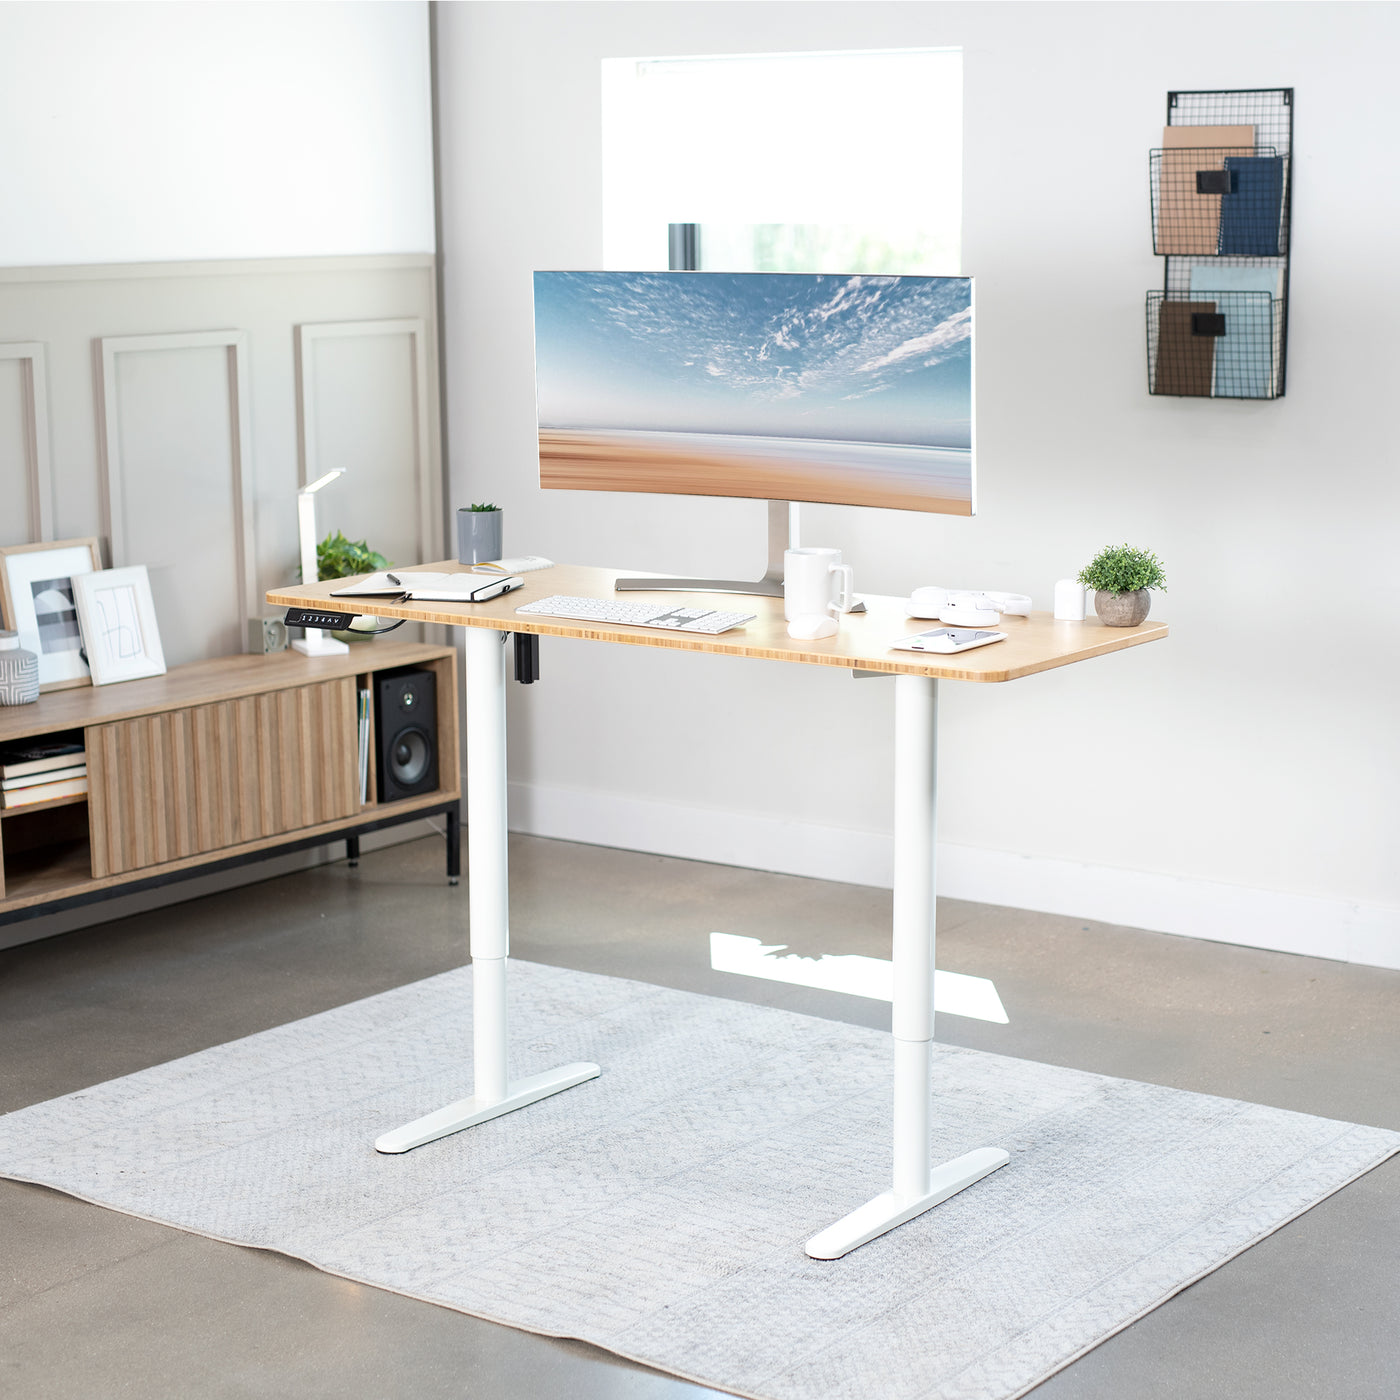 Sturdy ergonomic sit or stand desk frame for active workstation with adjustable height using smart control panel.